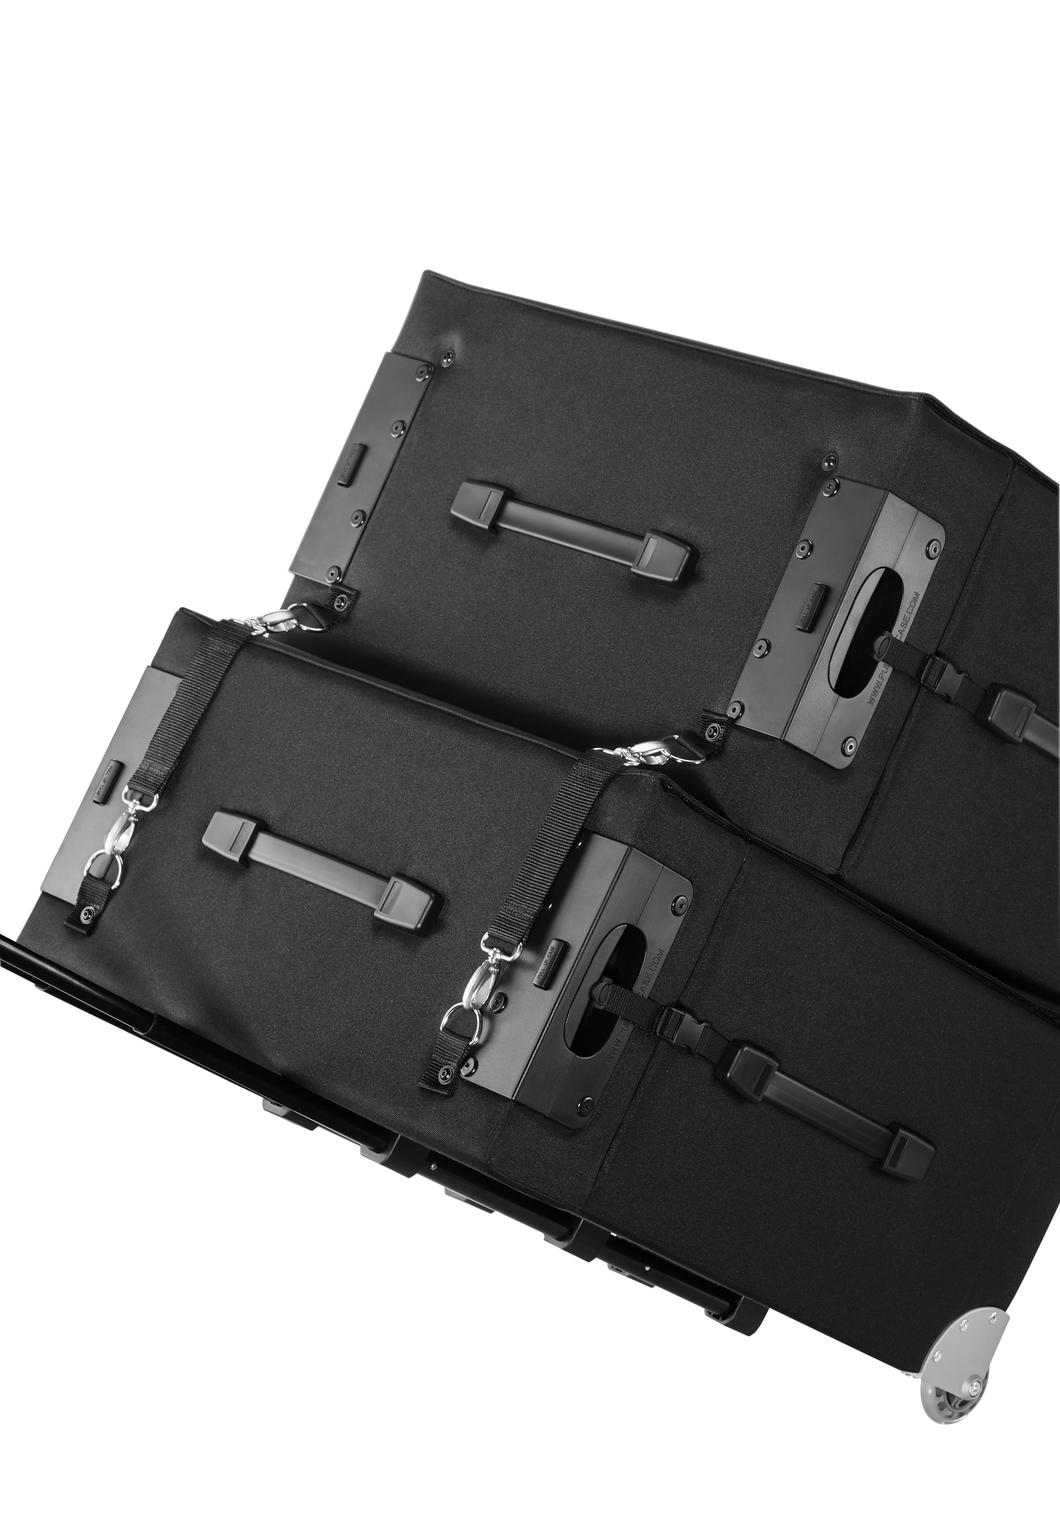 2 presentation cases Avantgarde connected with adapter strap